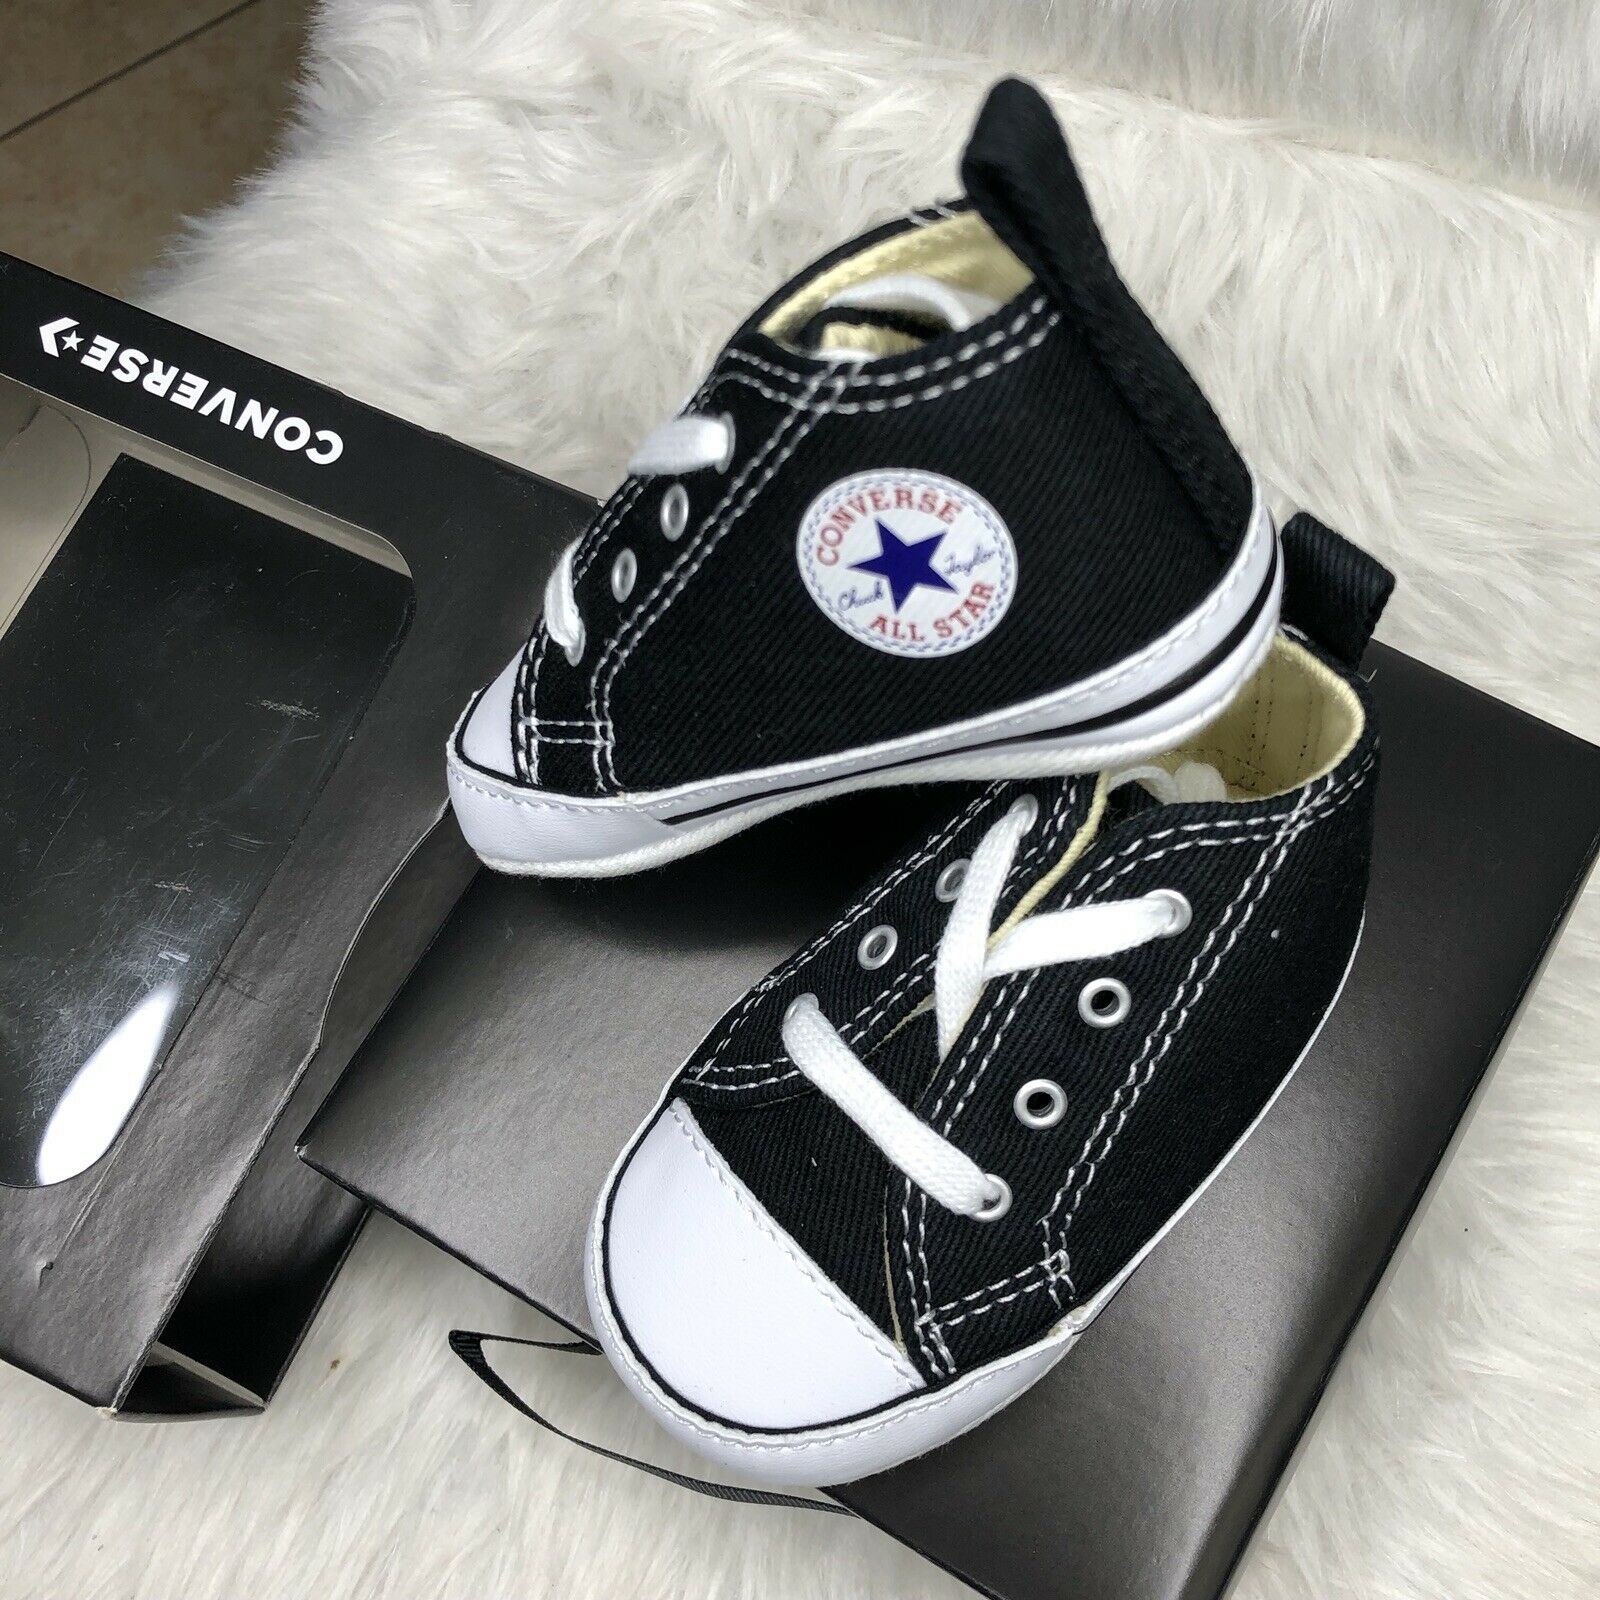 CONVERSE NEWBORN CRIB BOOTIES BLACK 8J231 FIRST ALL STAR BABY SHOES SIZE 4